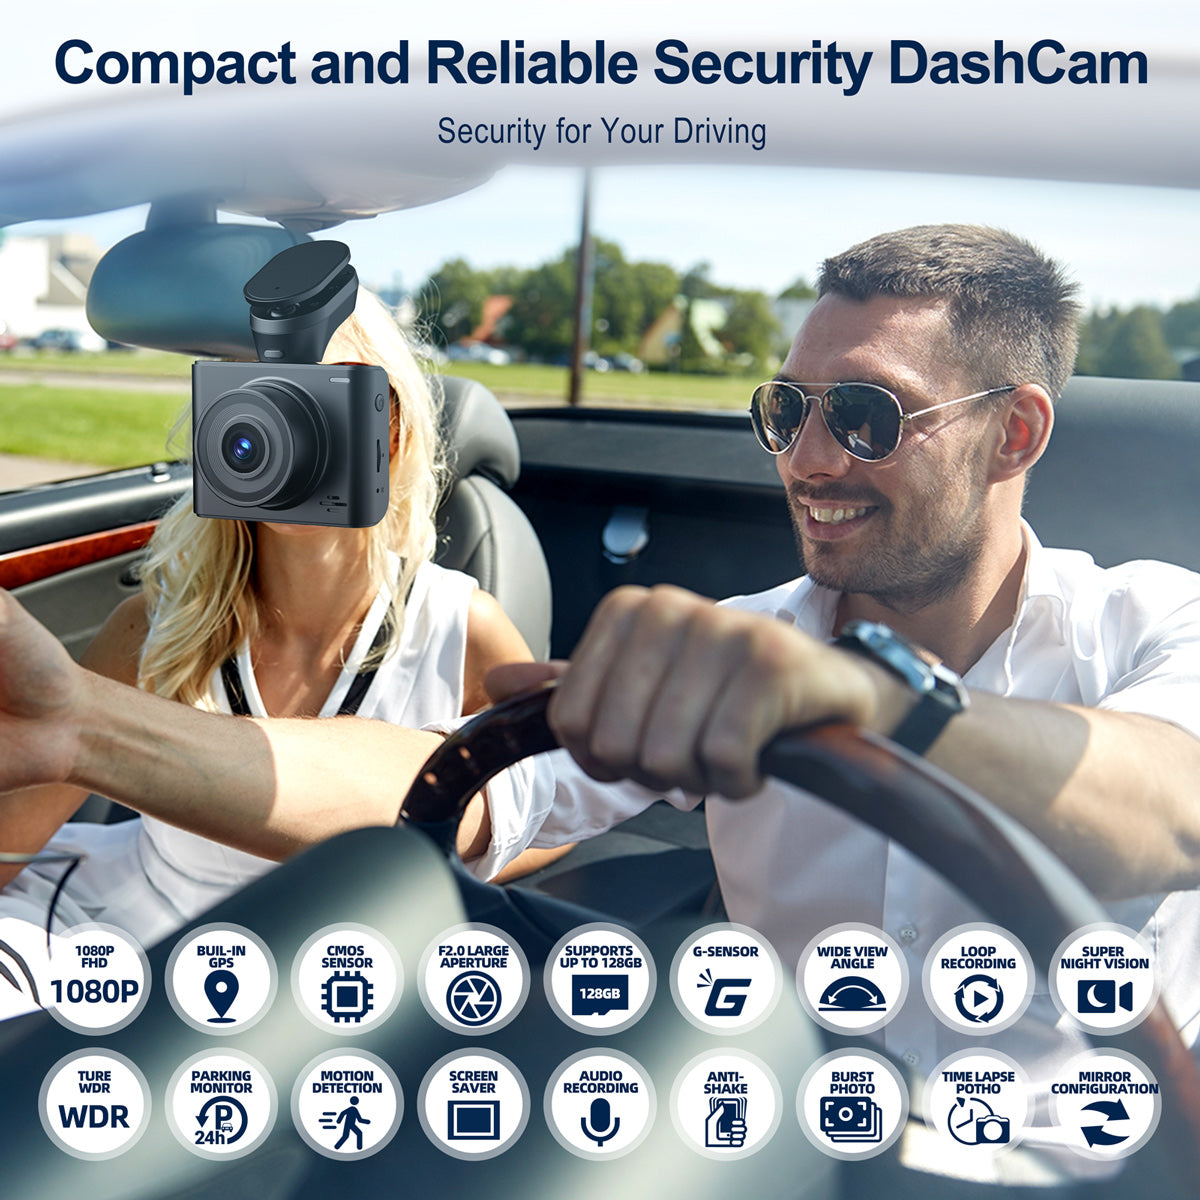 WiFi GPS 4K Dash Cam with IR Night Vision, Toguard 3 Channel Front Inside Rear Dash Camera Car Driving Recorder CE66A